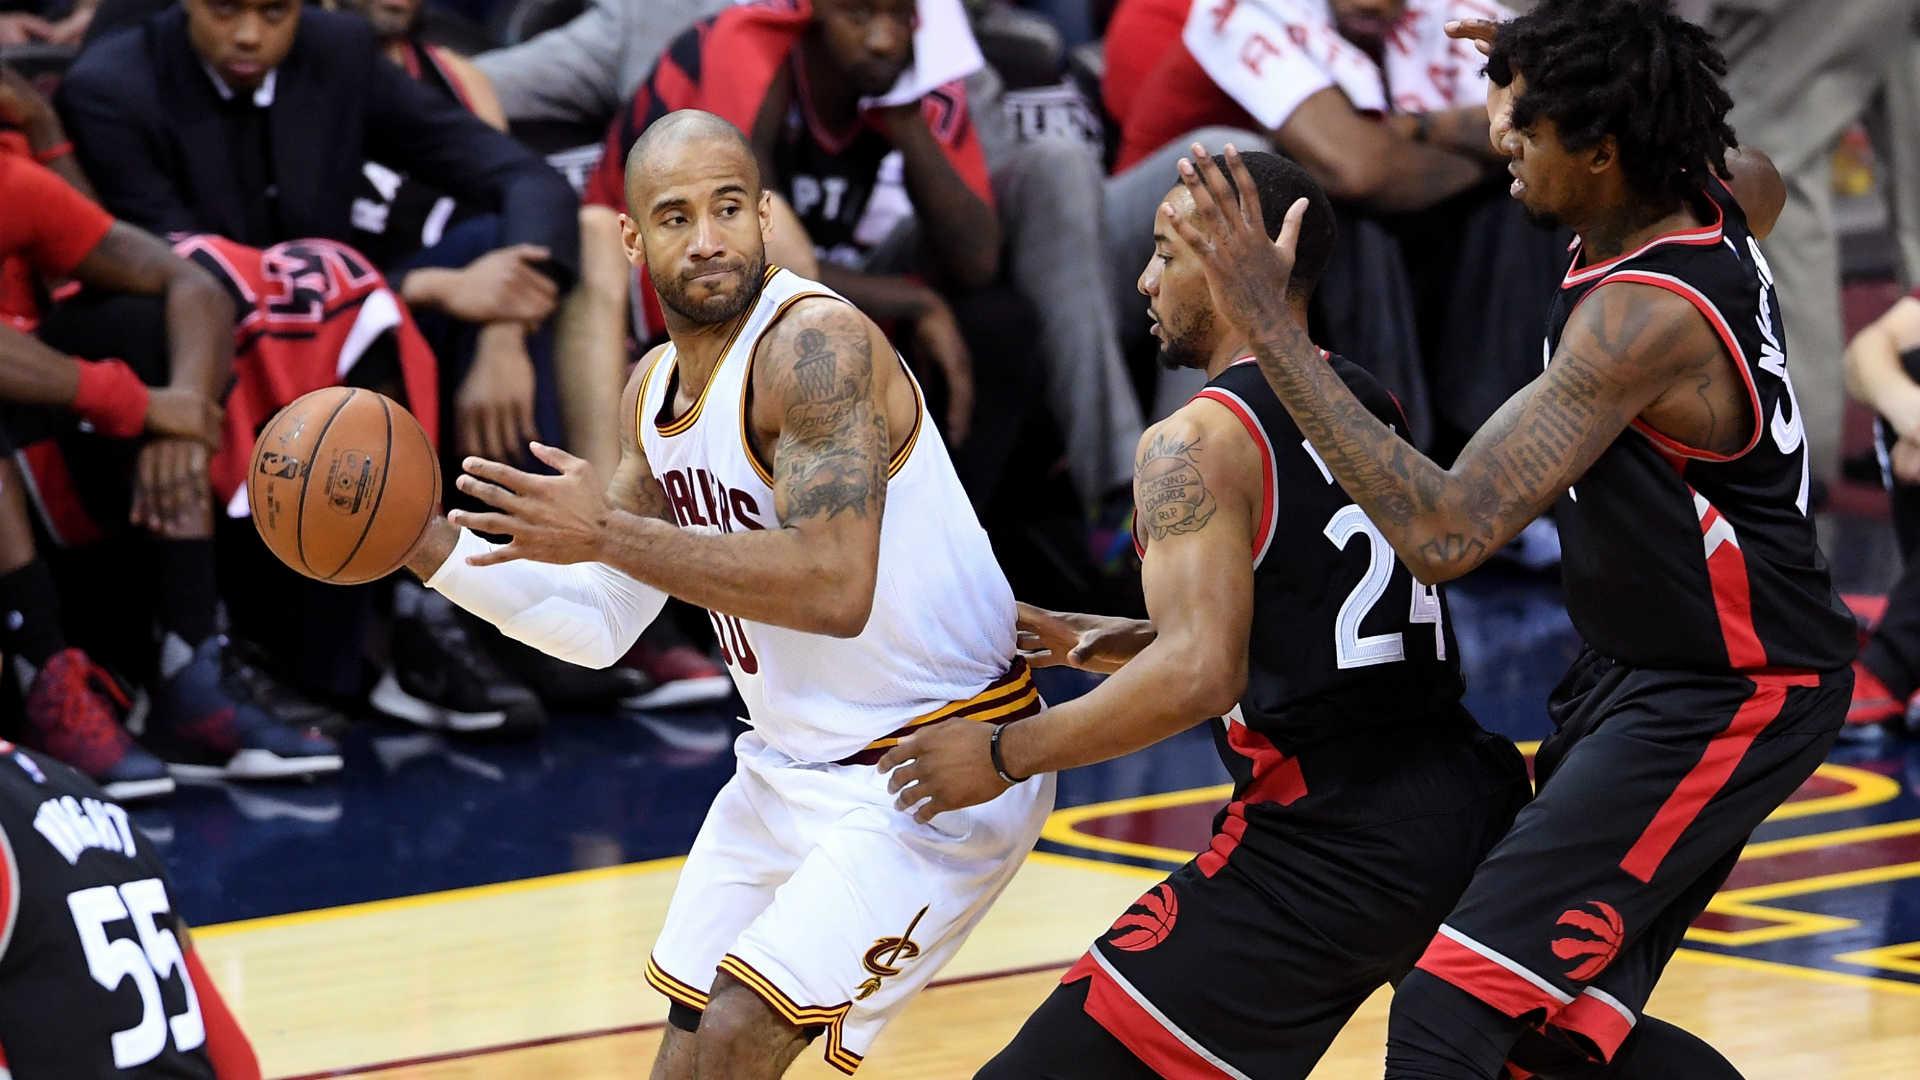 What Dahntay Jones said to Norman Powell that warranted an ejection